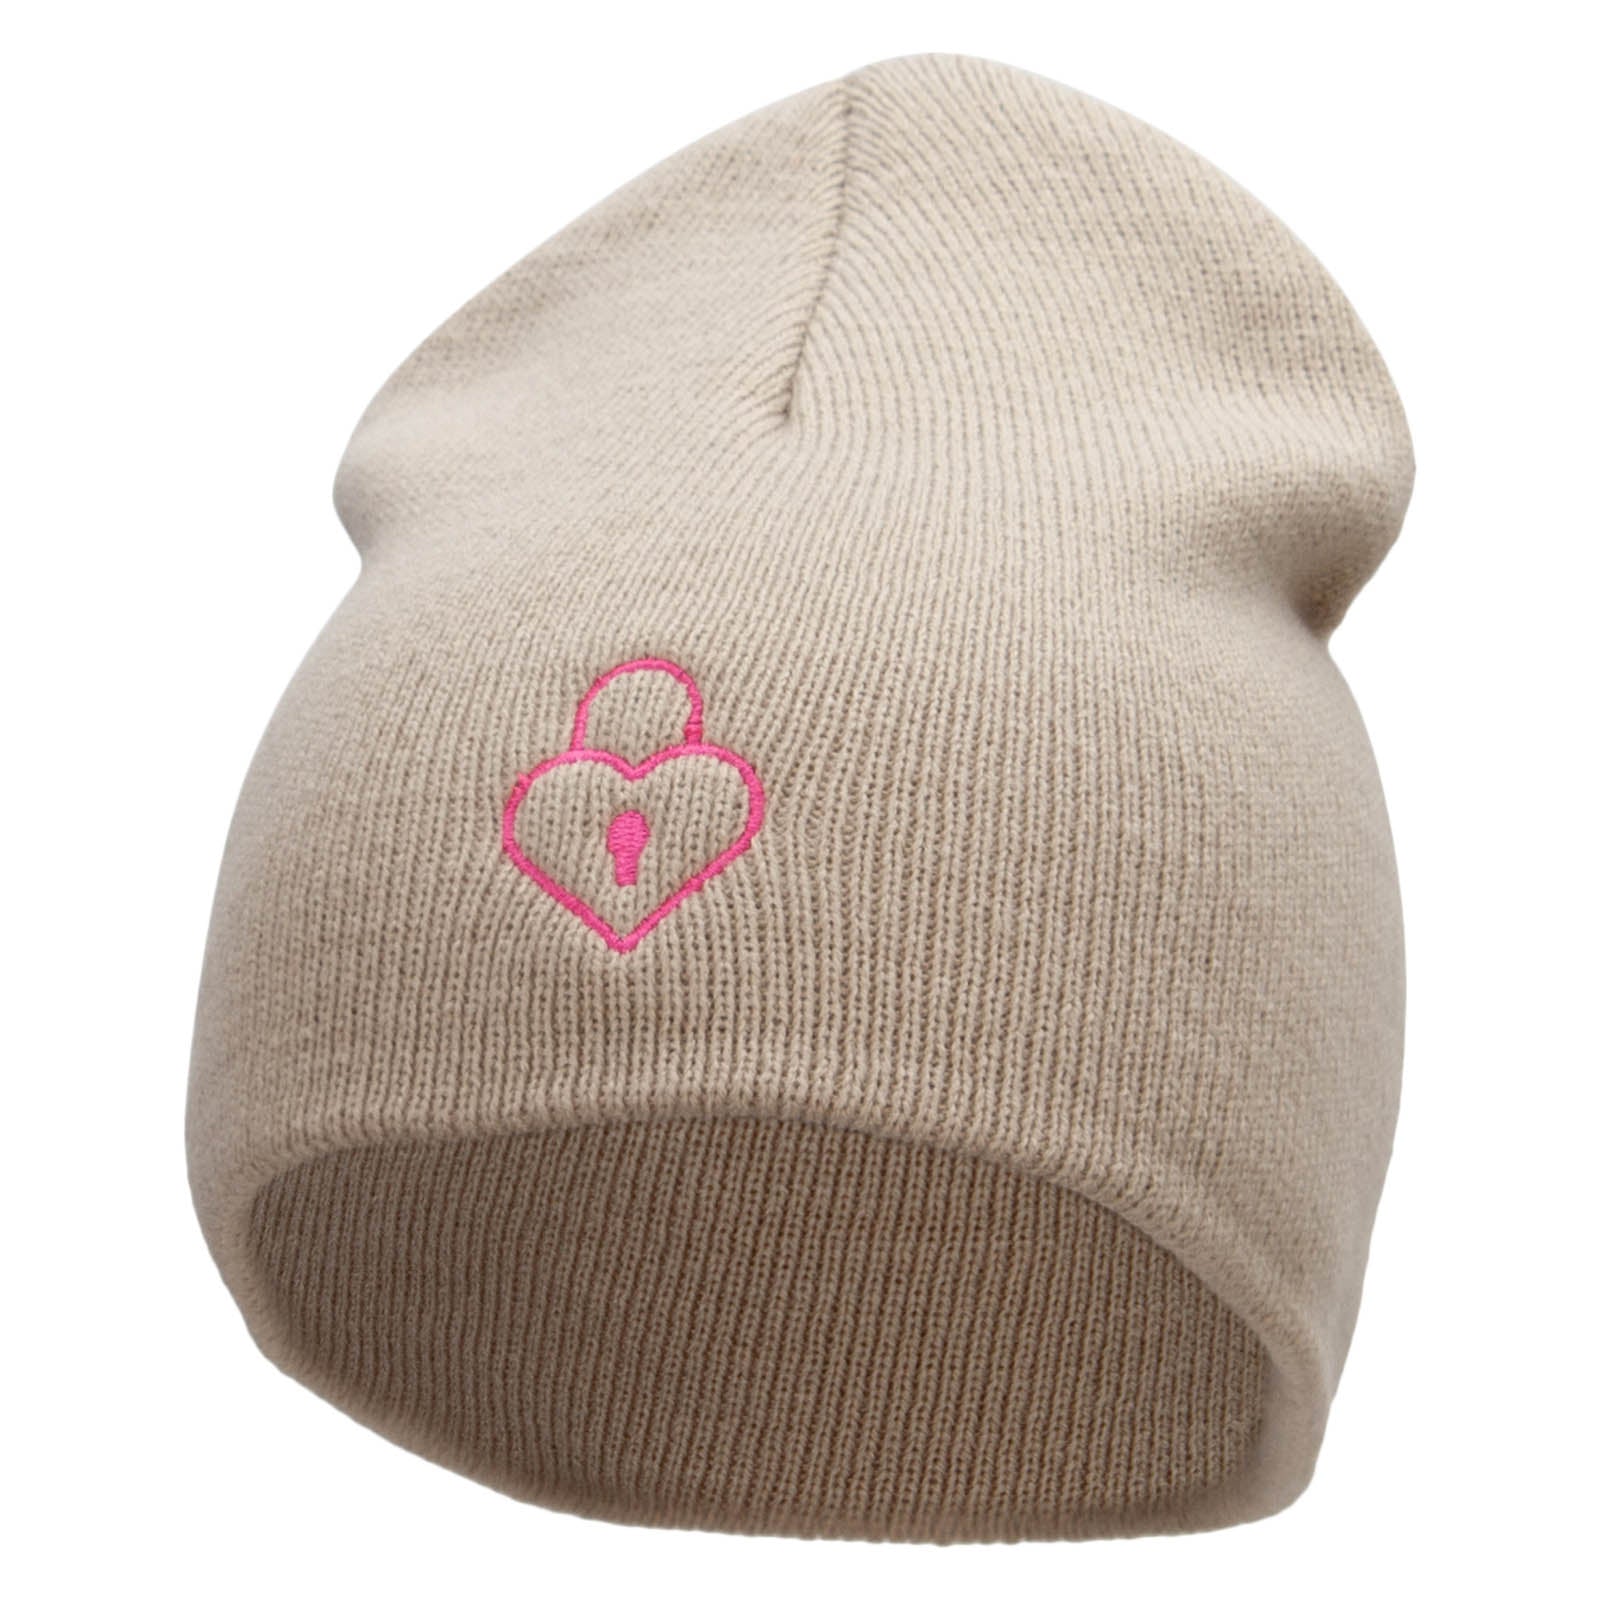 Lock Of Love Embroidered 8 Inch Short Beanie Made in USA - Cream OSFM